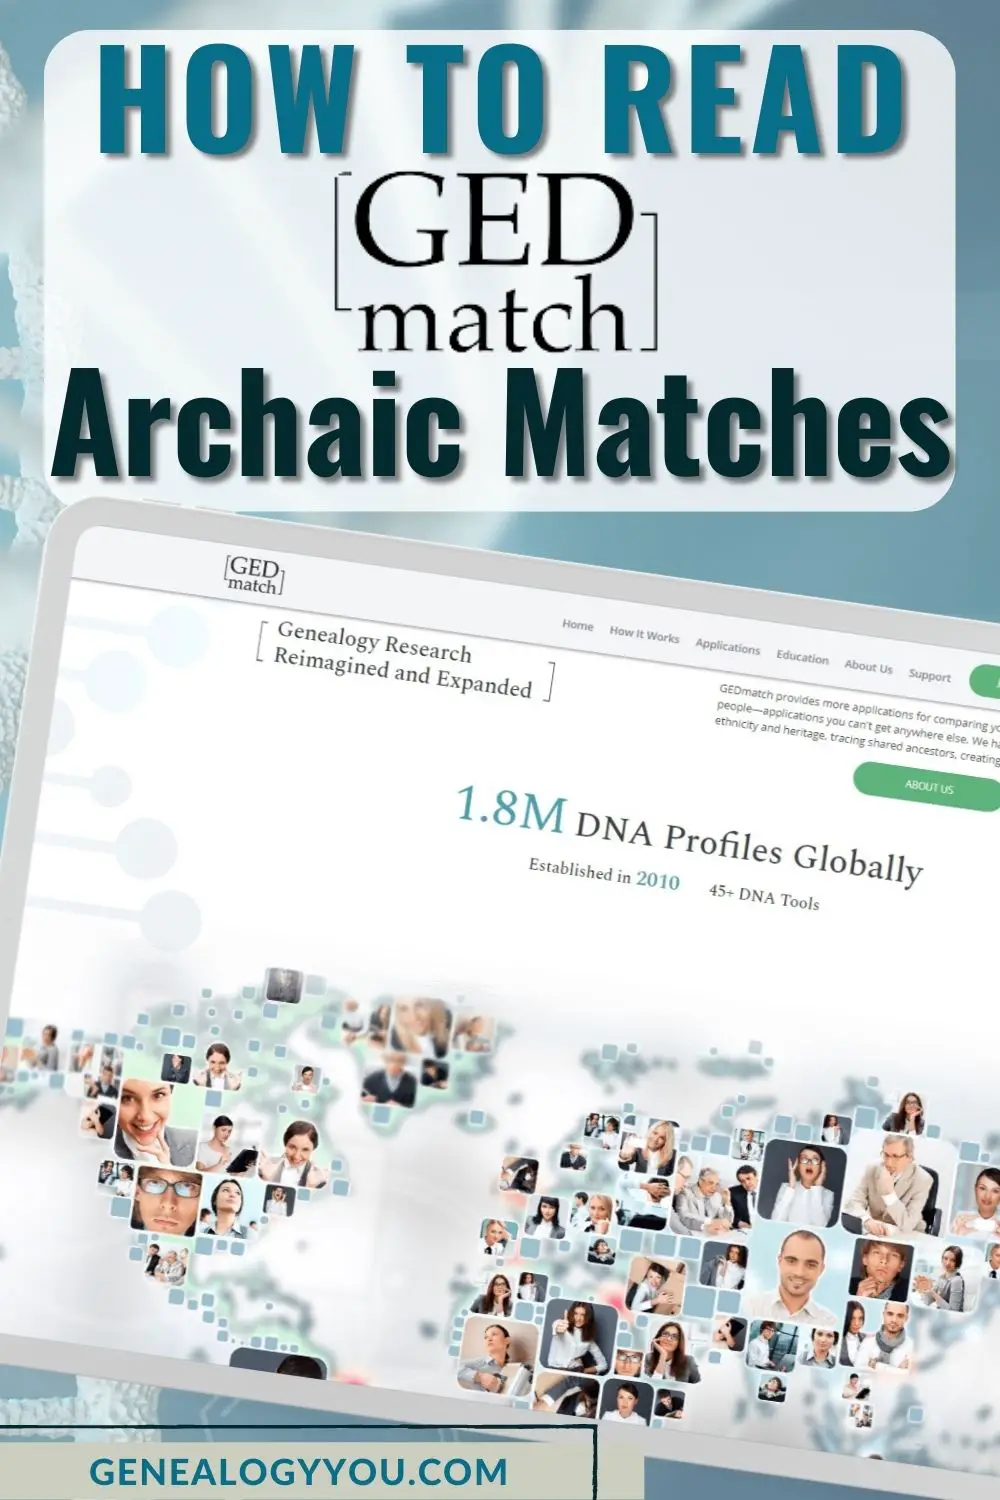 Image of a web page og Gedmatch website in mocked up tablet with text overlay that reads How to Read Ged match Archaic Matches